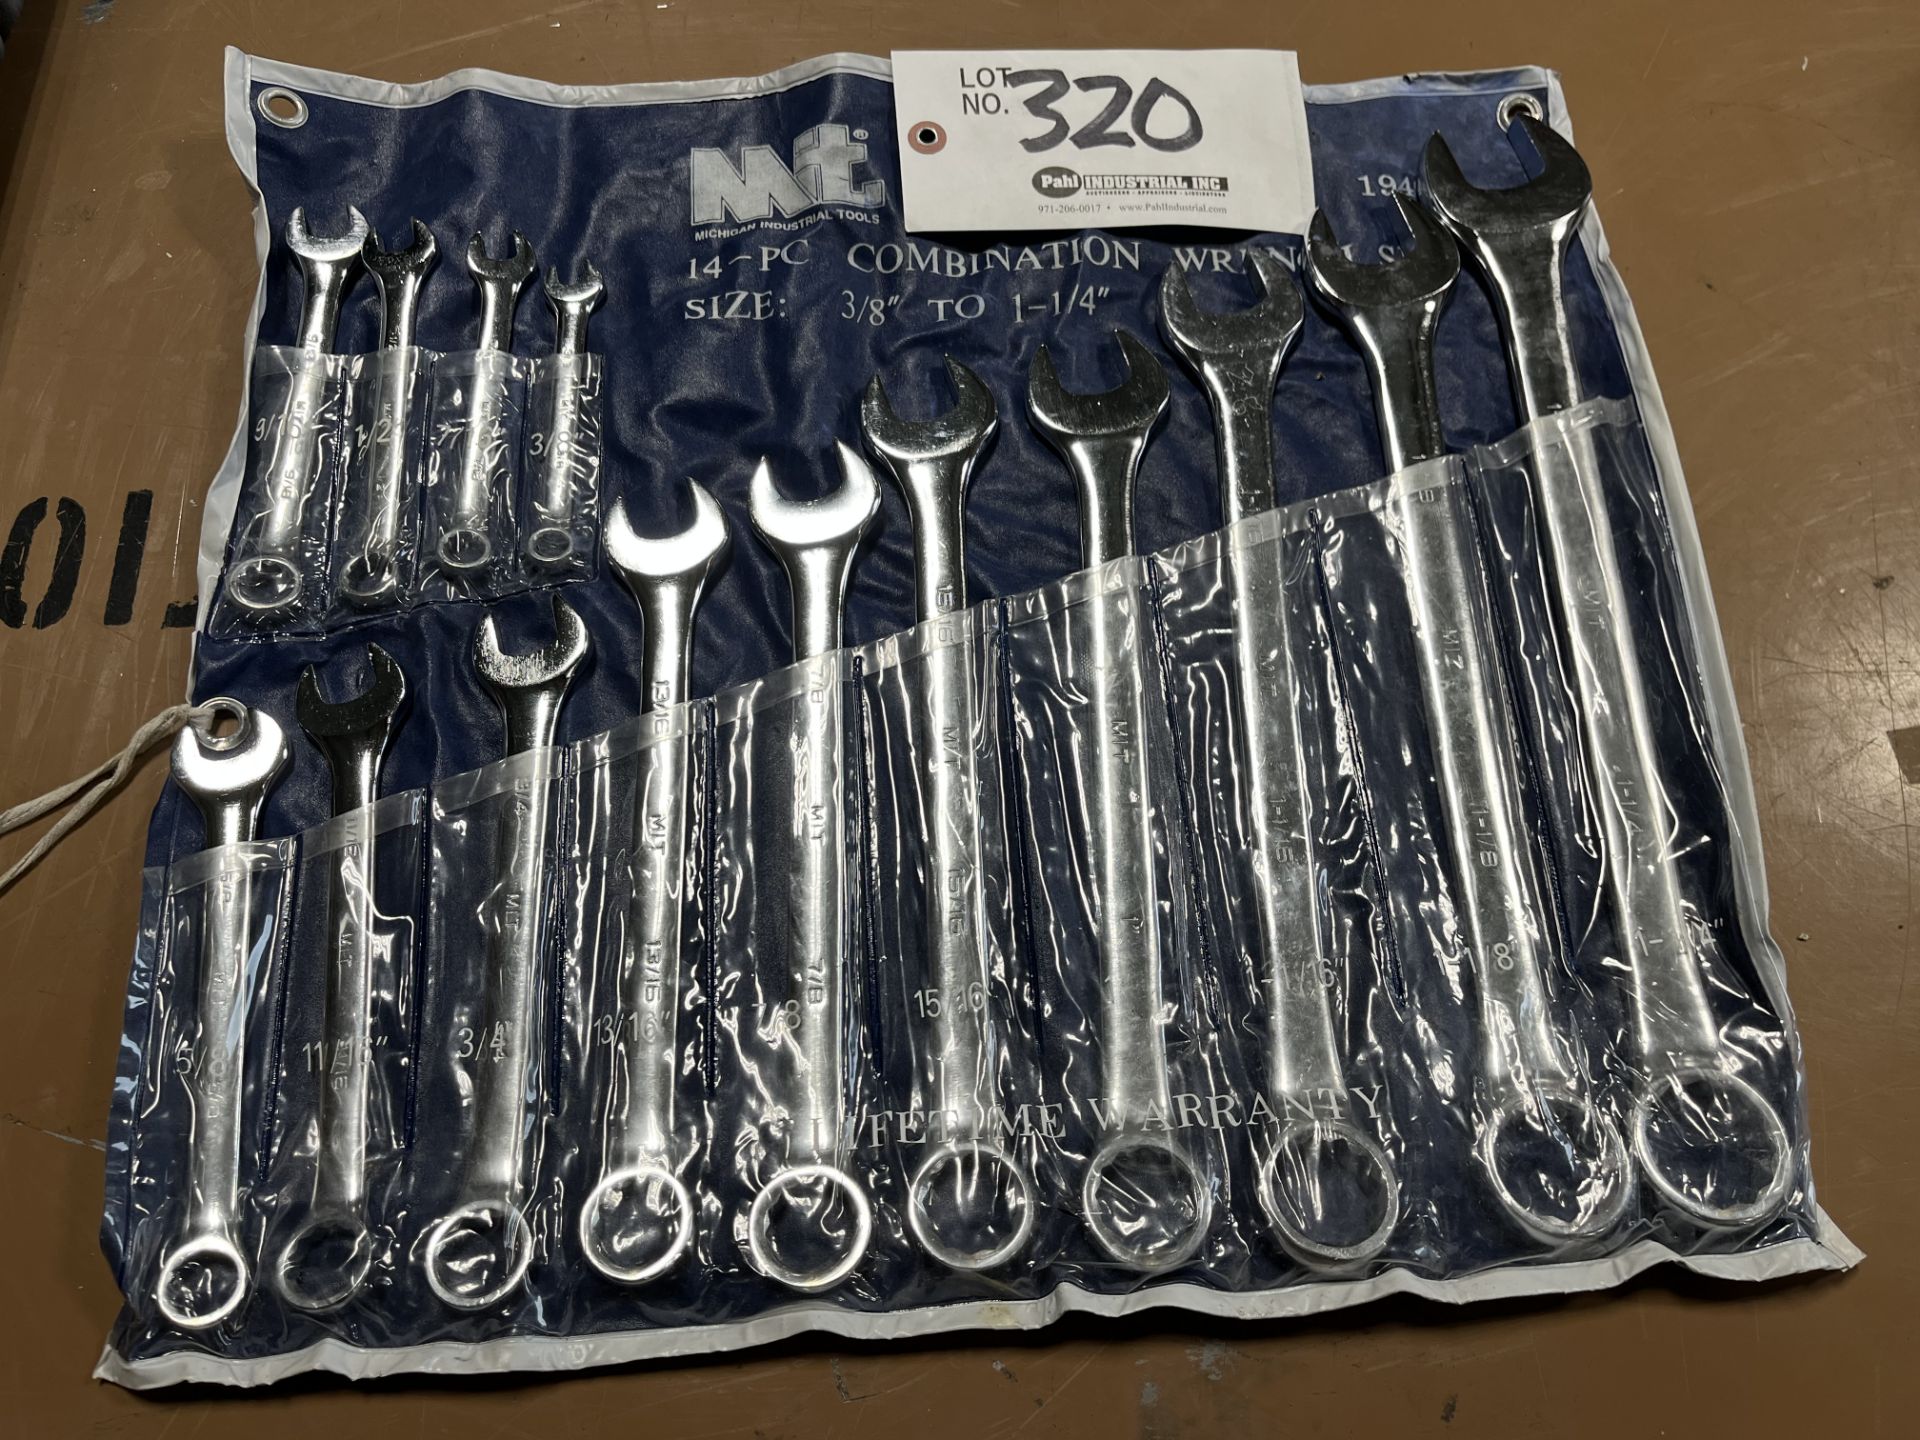 Michigan Industrial Tools 14 pc Combination Wrench Set 3/8" - 1.25"